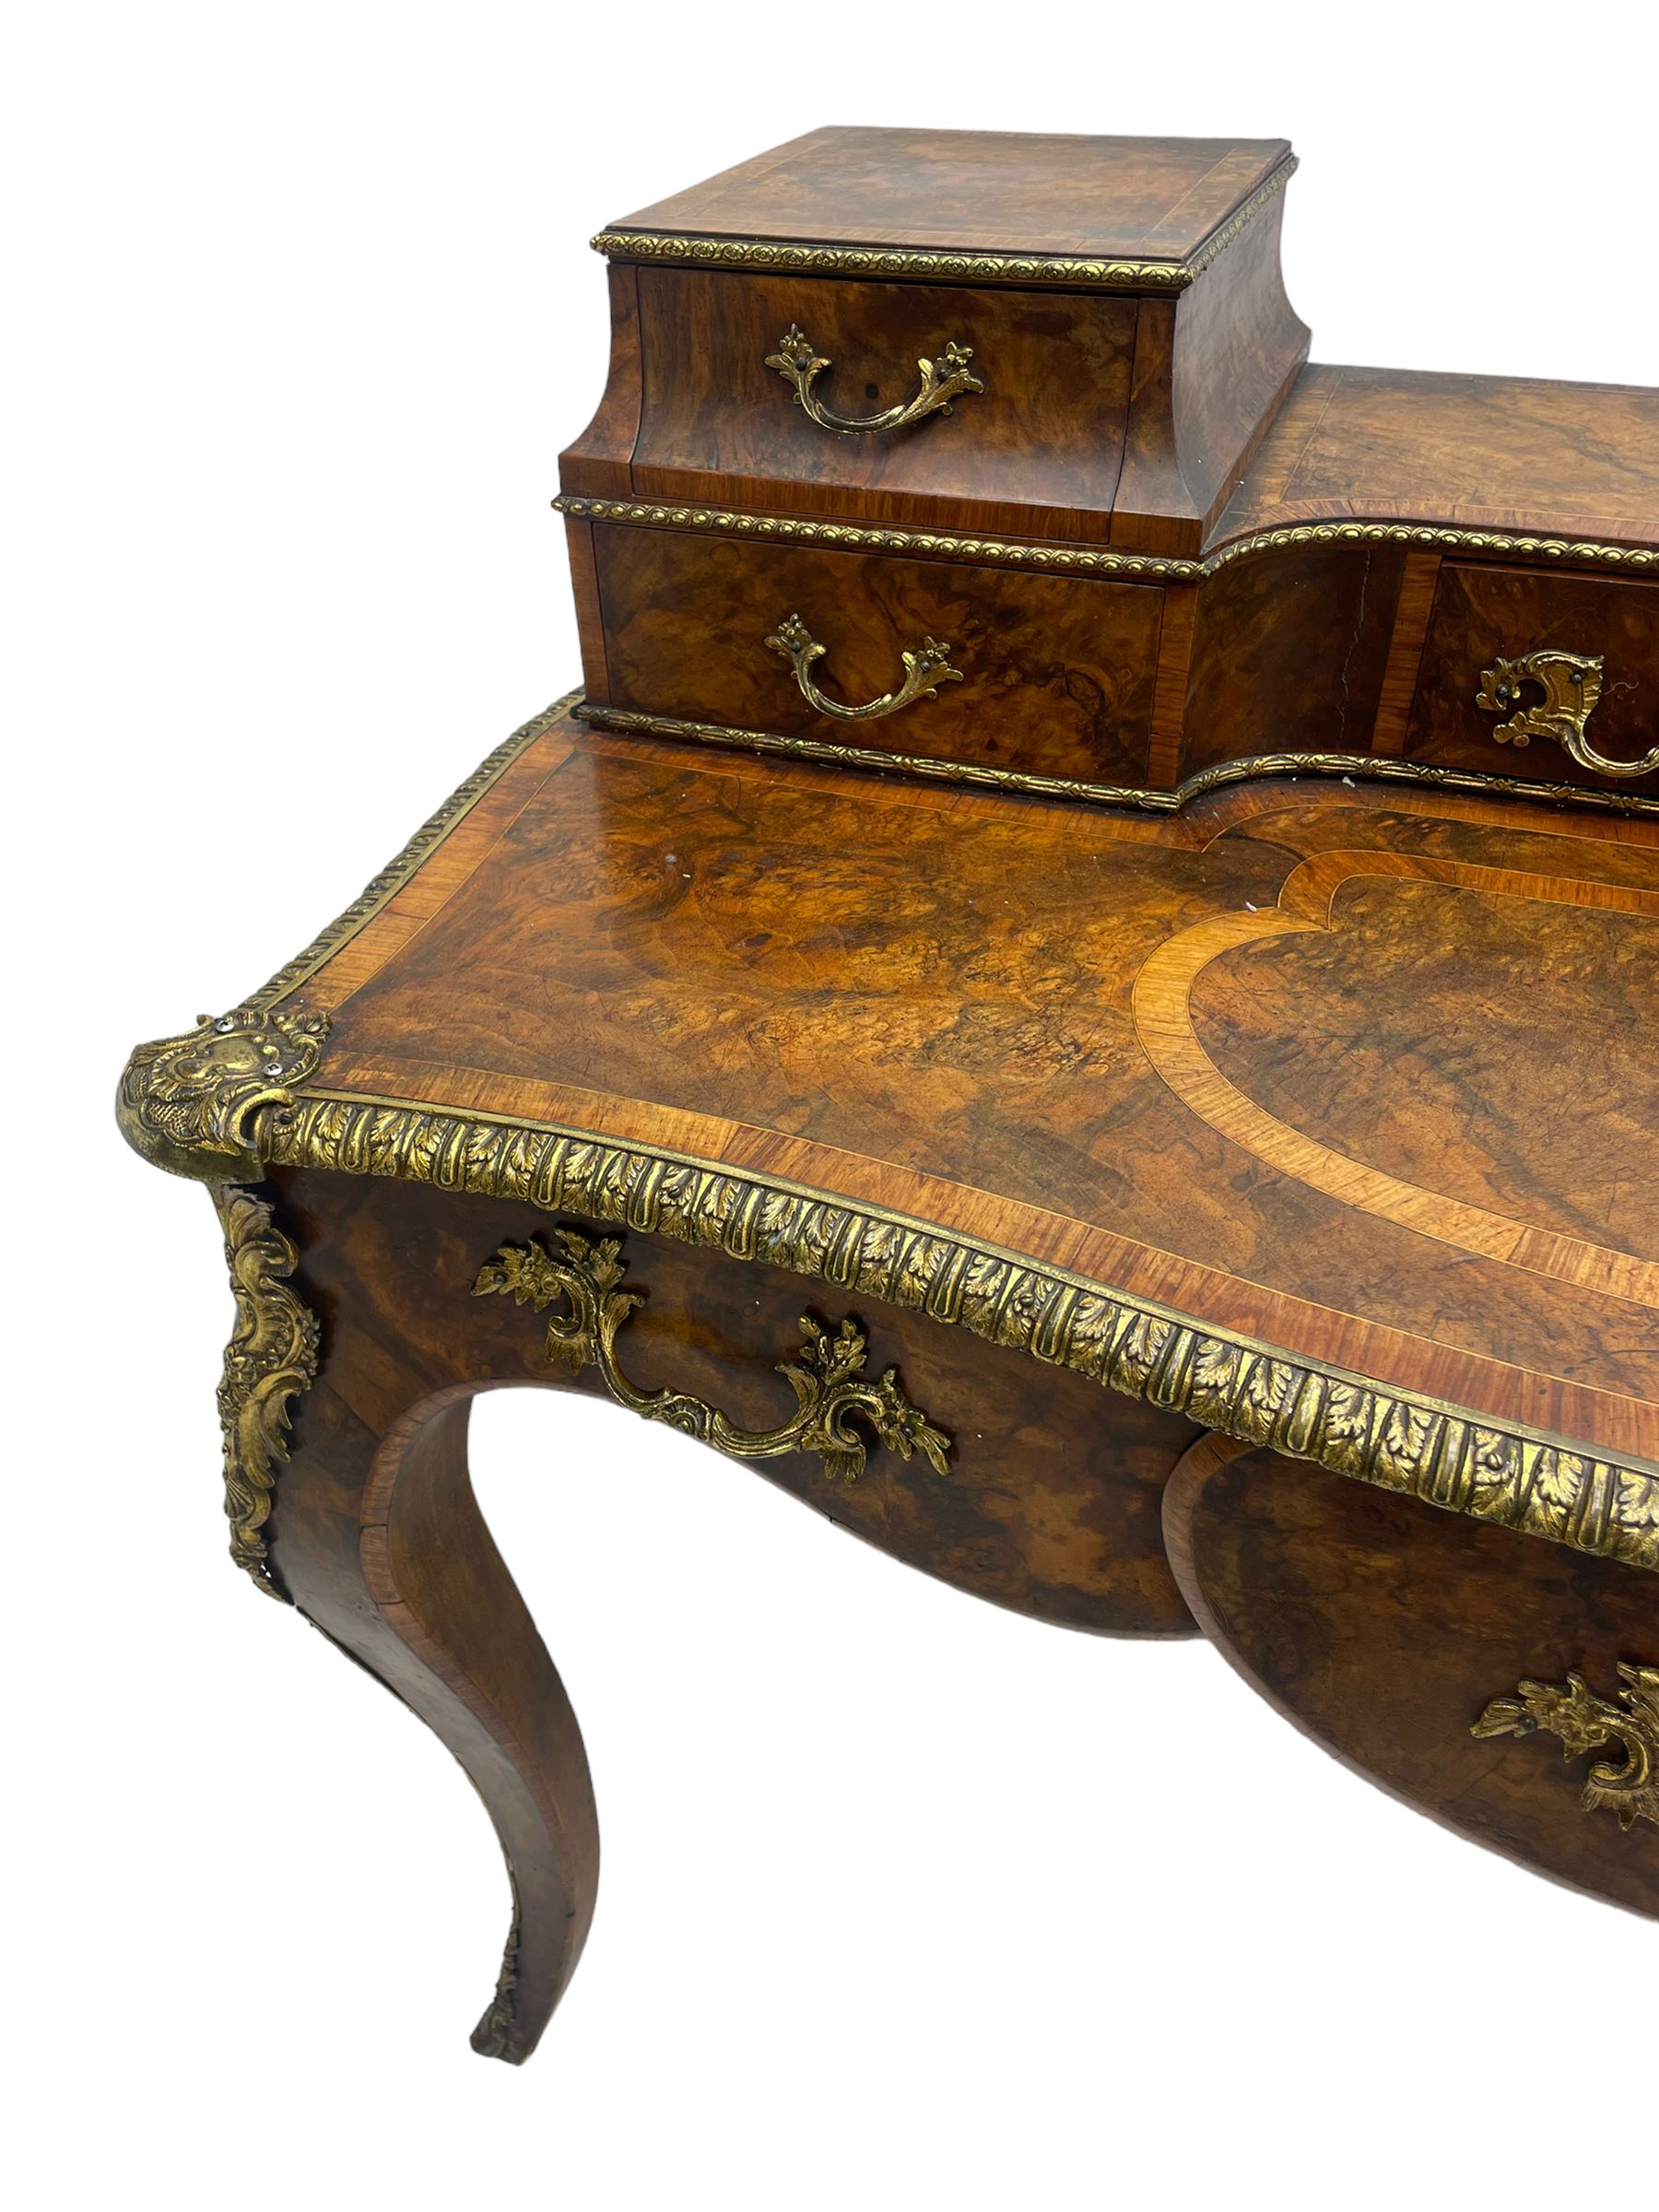 Late 19th to early 20th century French figured walnut writing desk - Image 3 of 13